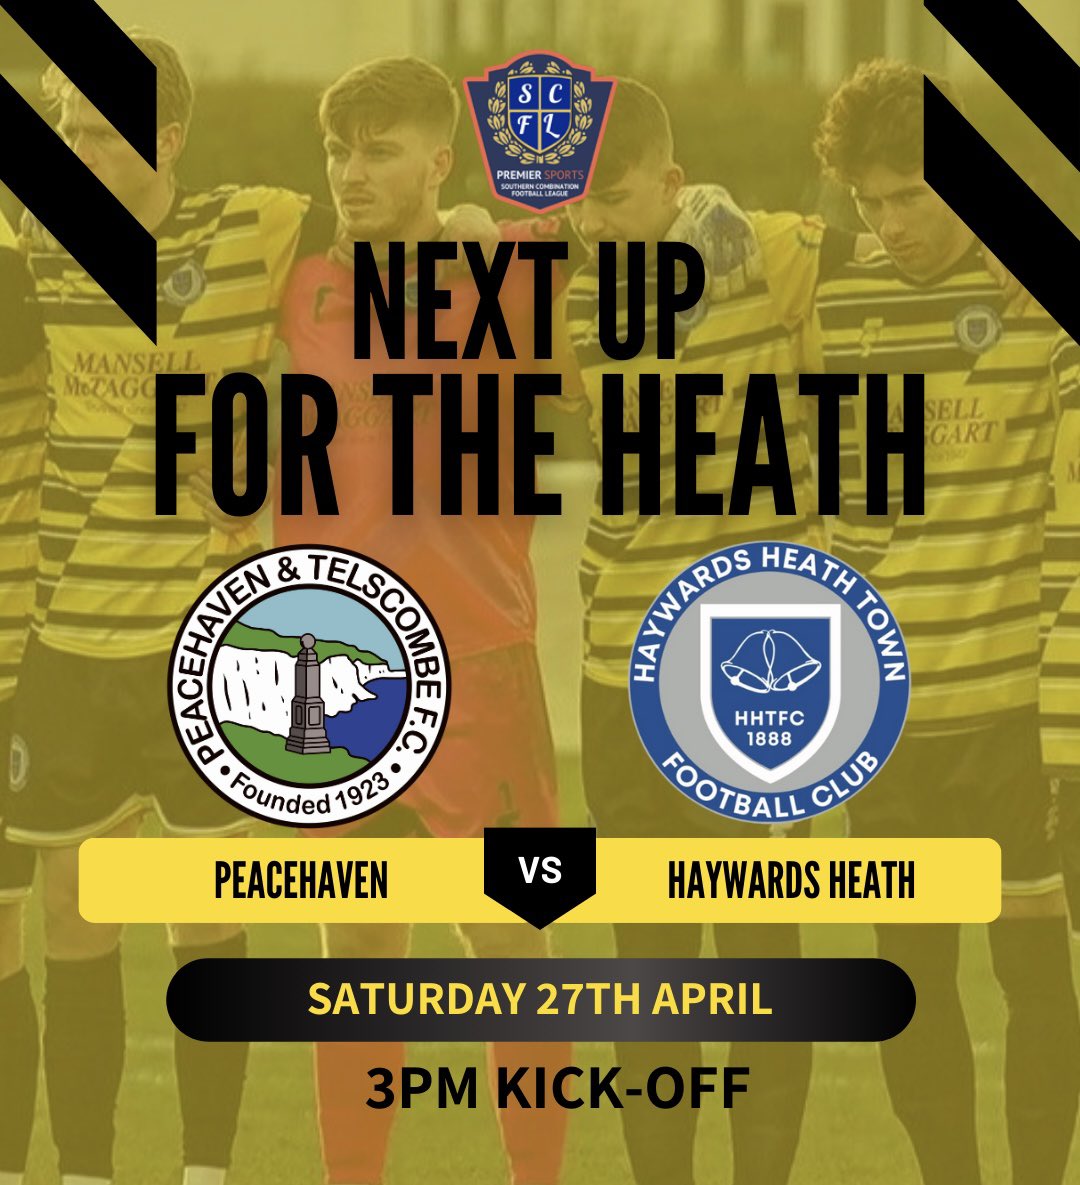 Our final game of the league season for the Heath this Saturday, and it’s a journey to the coast to take on Peacehaven & Telscombe FC!

Hoping to wrap up the season with a win 👊⚽️

#HHTFC